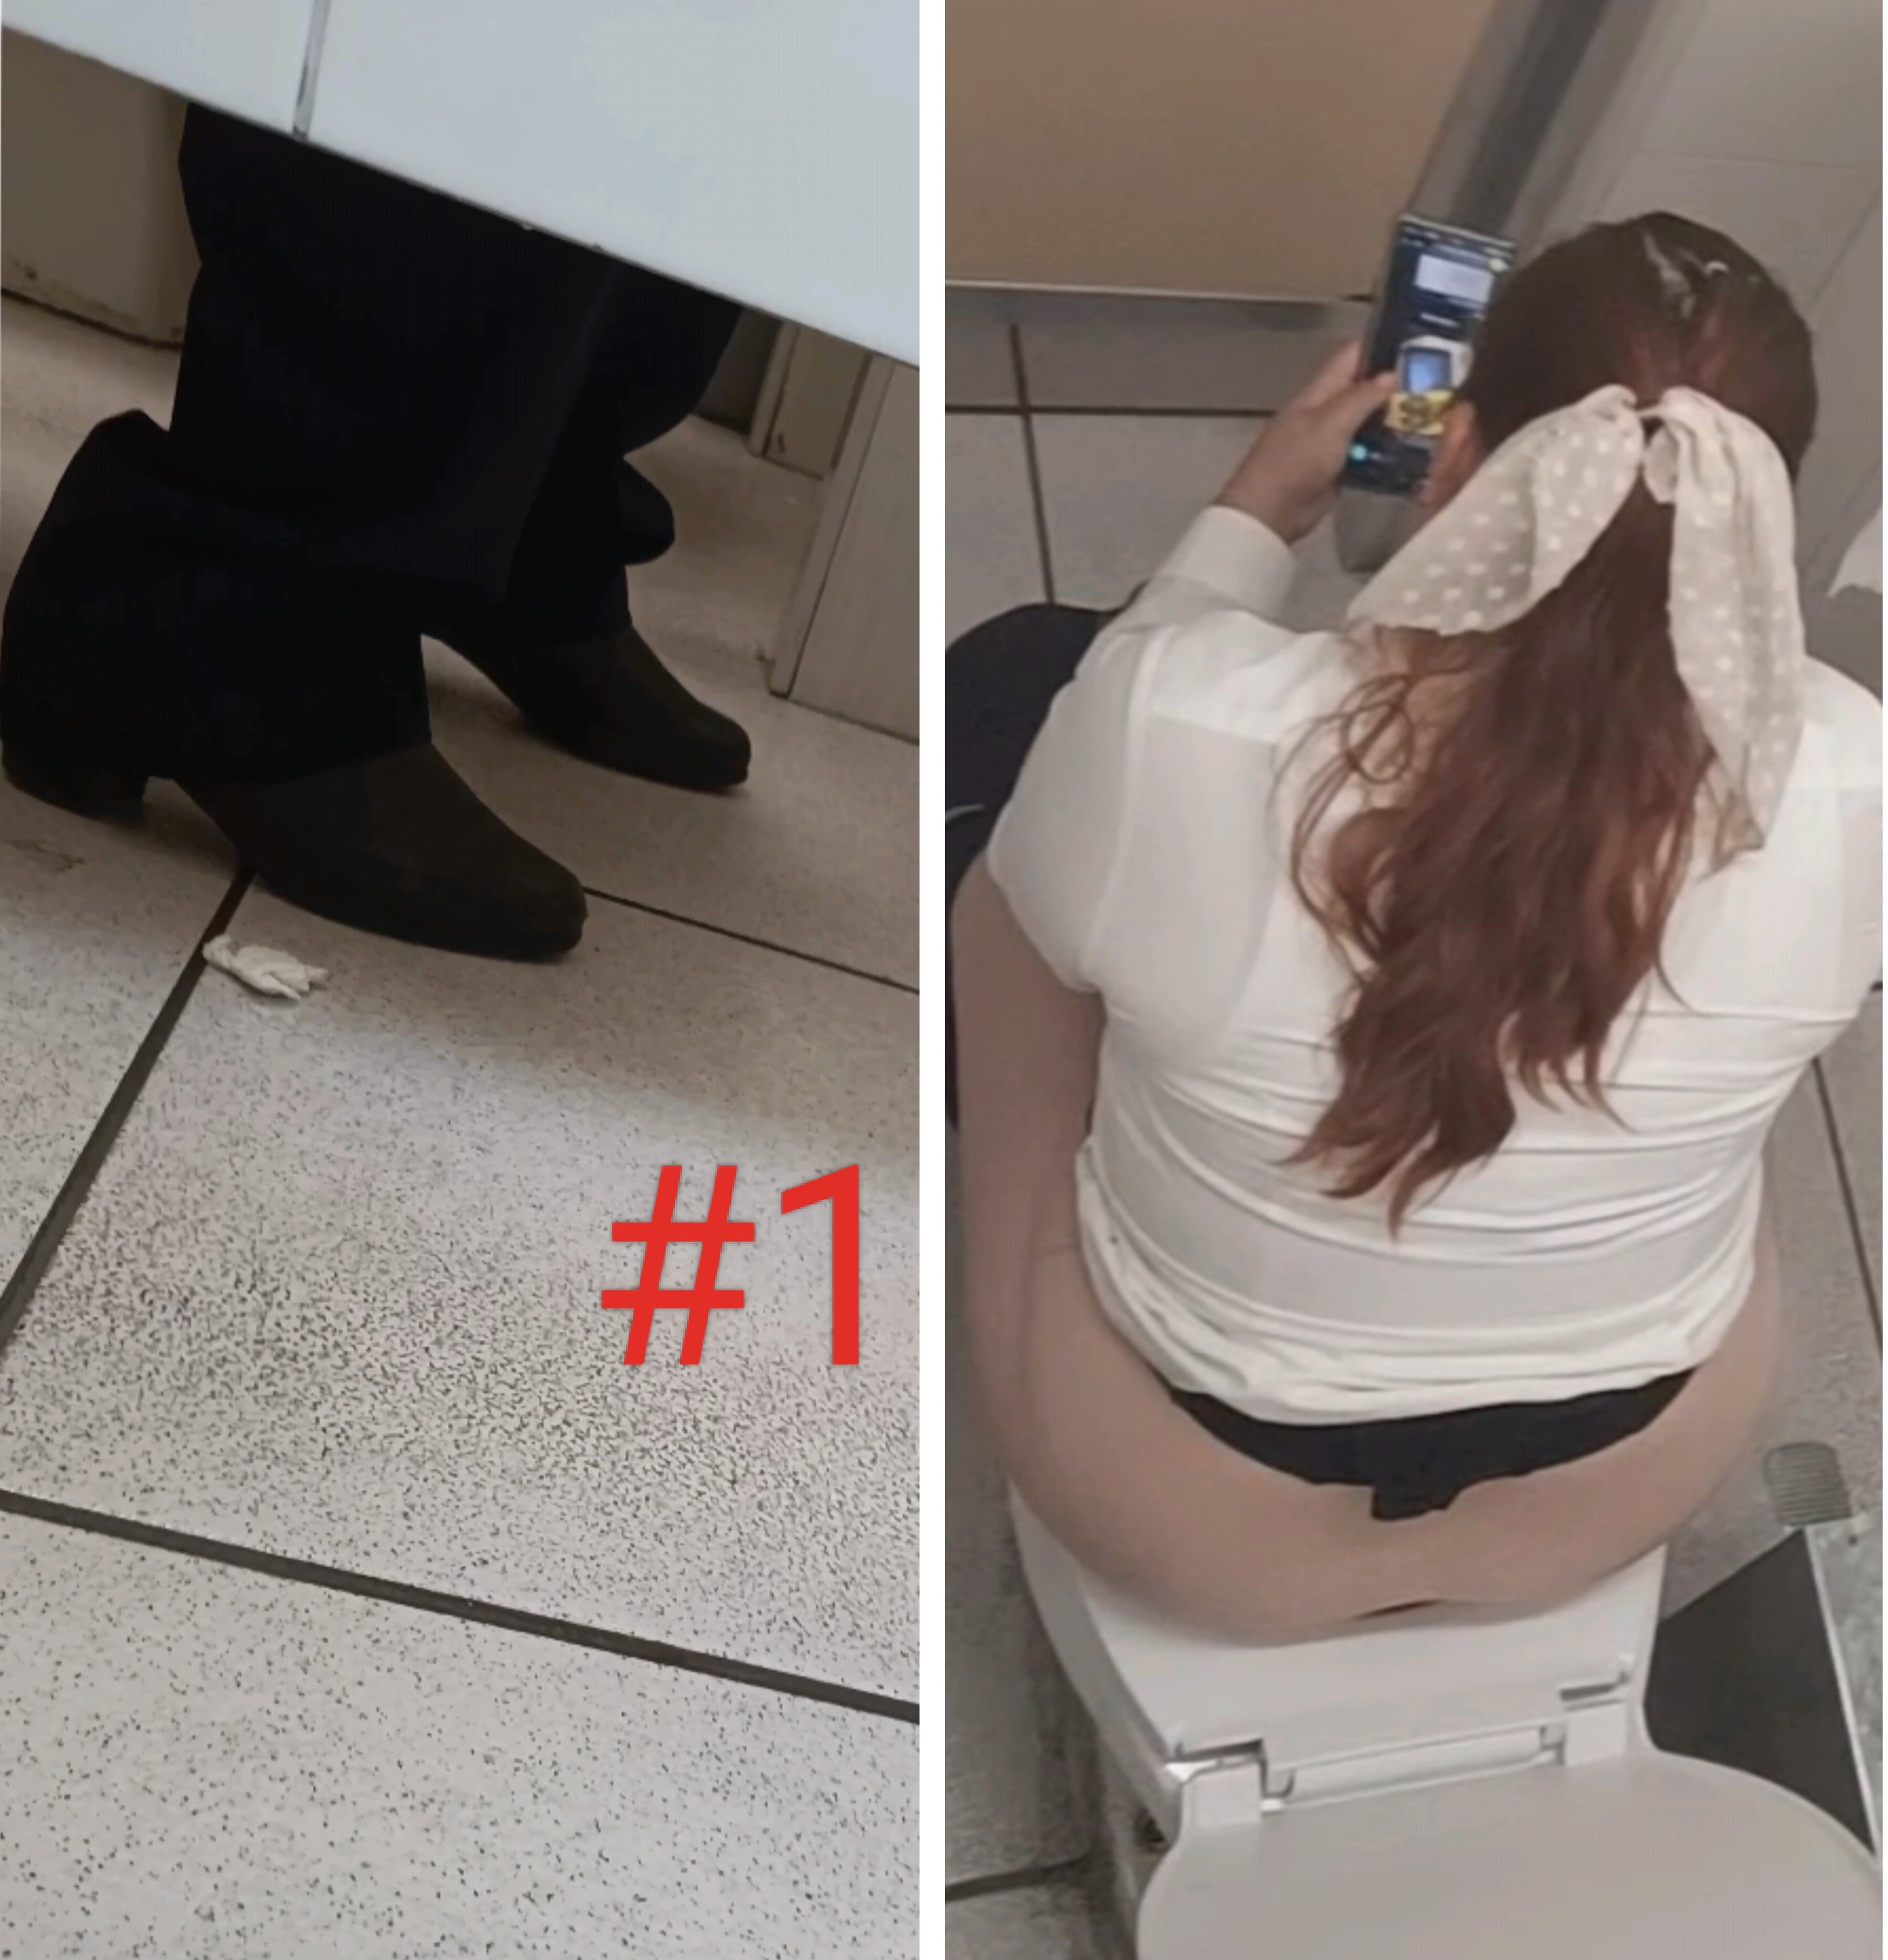 ANOTHER CUTE GIRL SHITS IN COPPEL #1